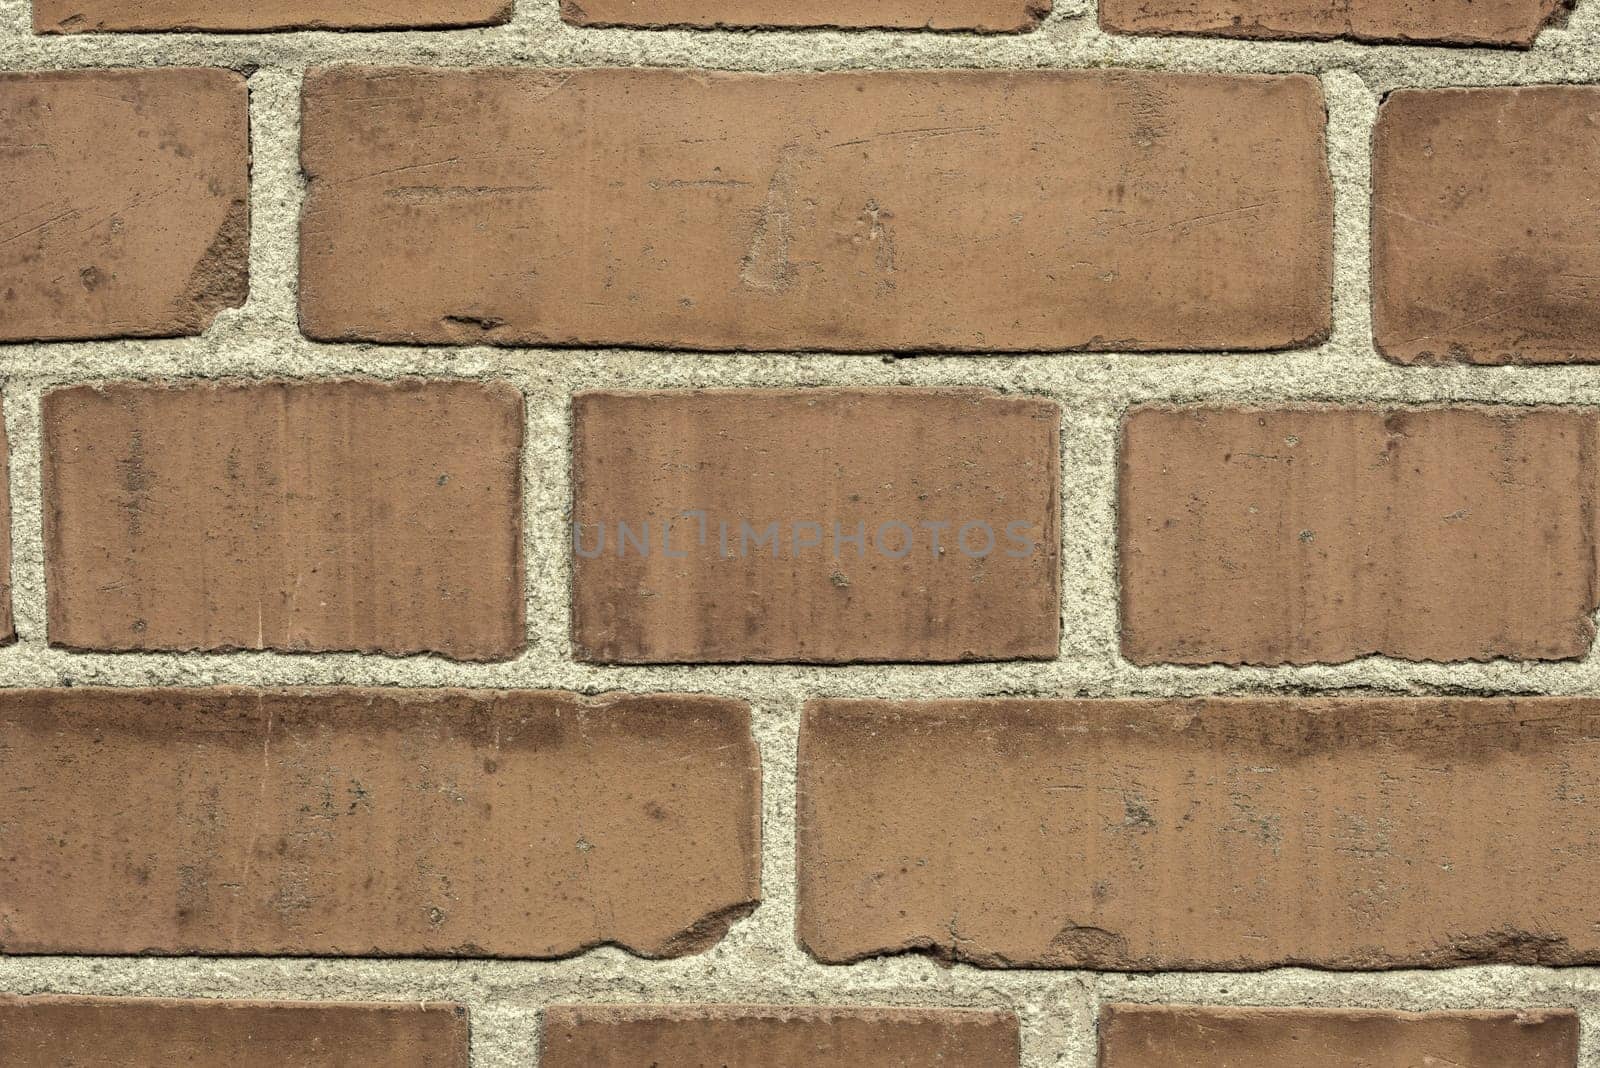 Brick wall, mortar and closeup for masonry construction, building and texture materials with paste.Cement, concrete and block shape clay with cracks or dents on solid surface or design wallpaper.